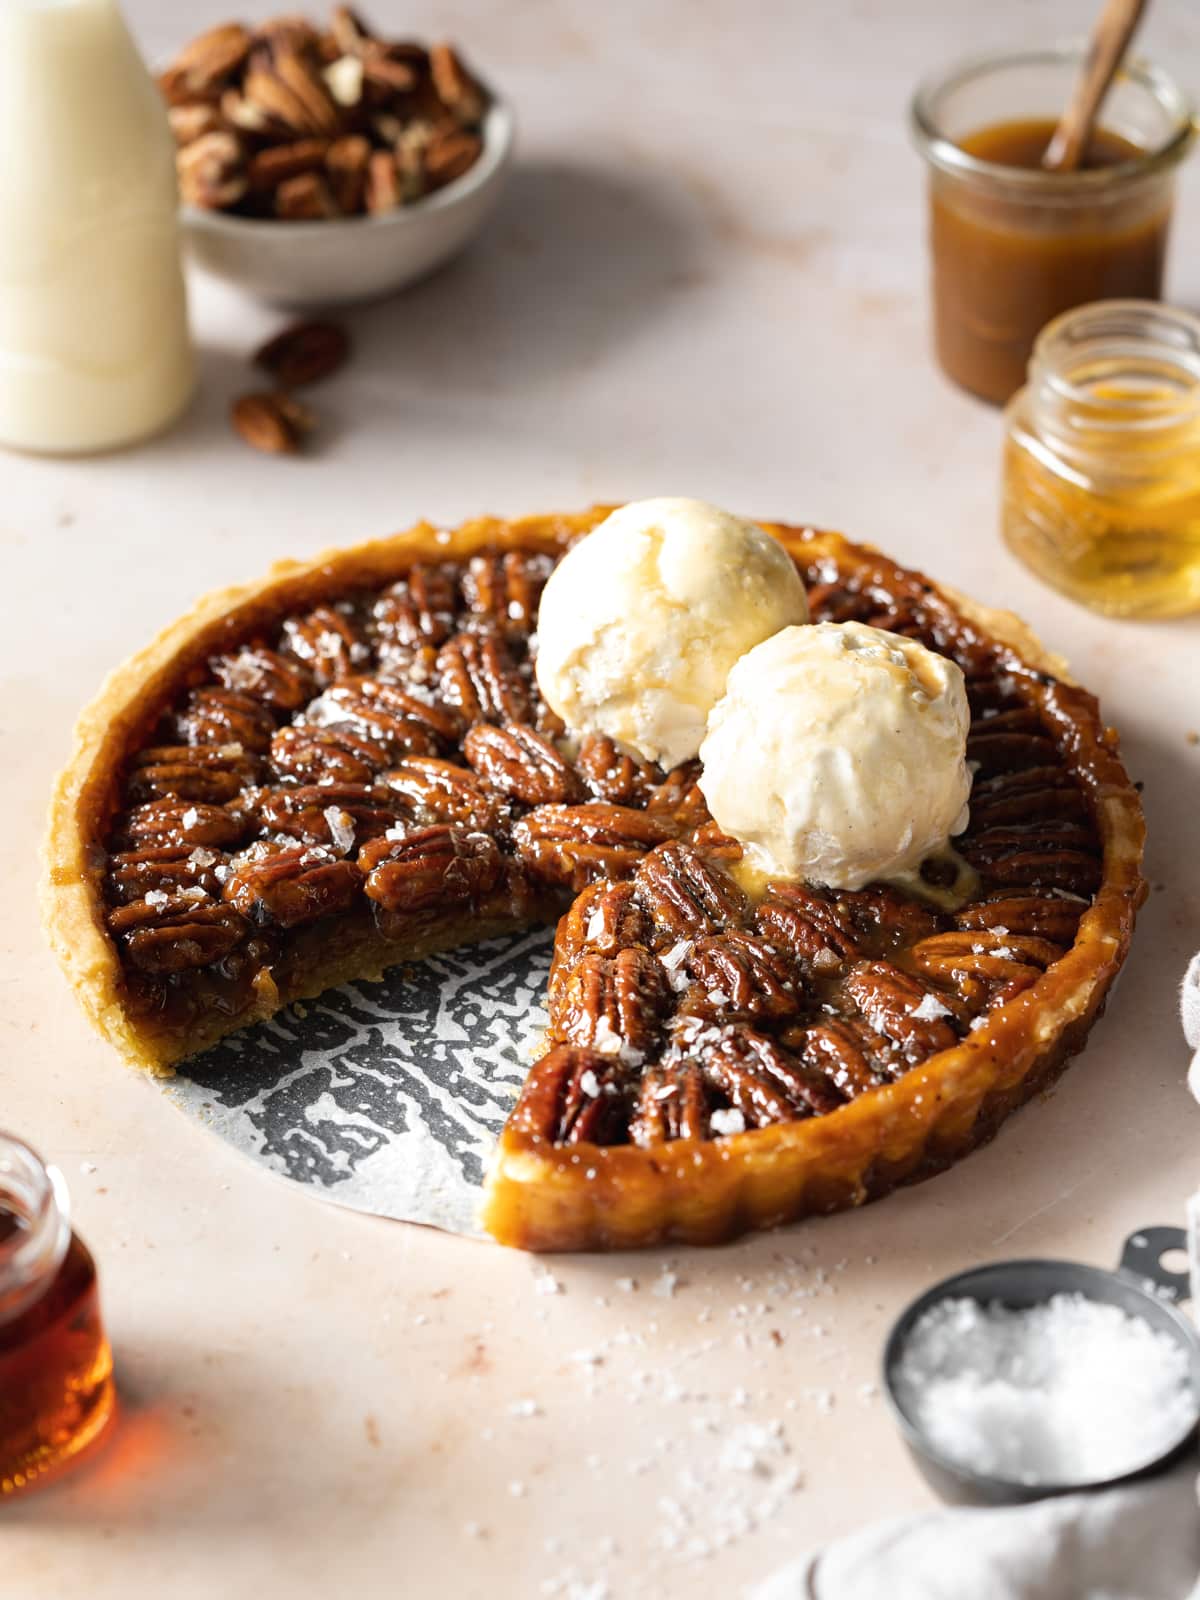 pecan pie with two scoops of vanilla ice cream and maple syrup on a peach marble surface.